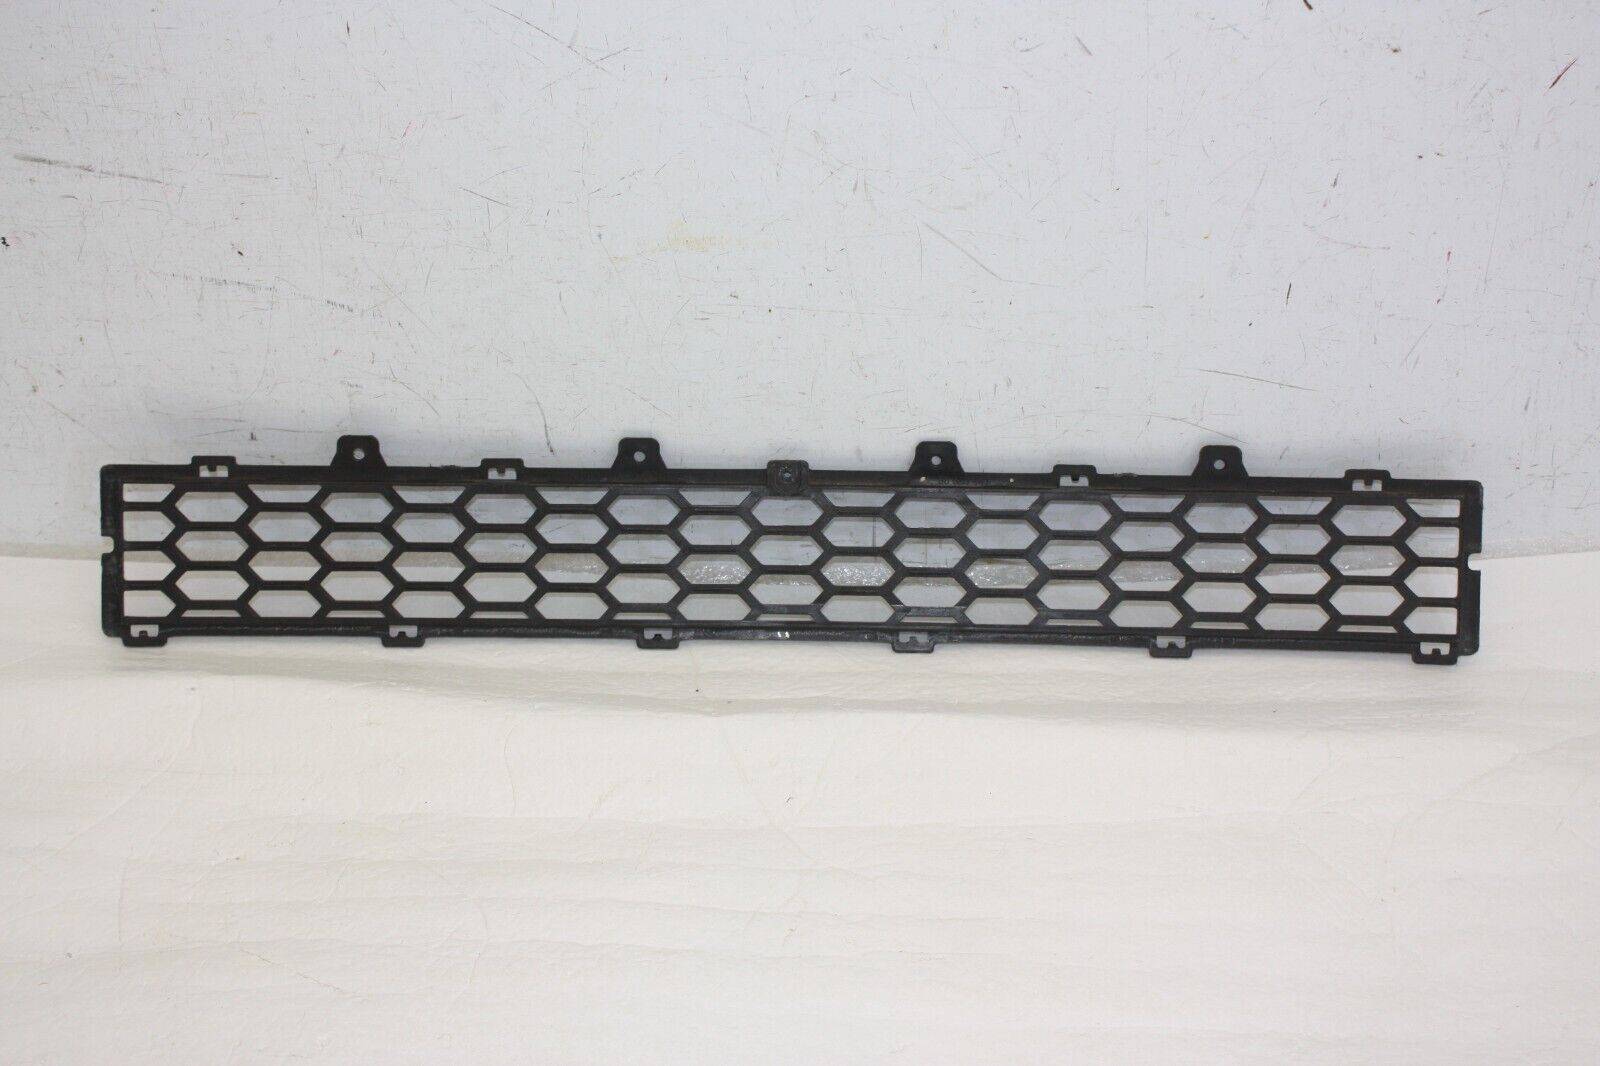 Chevrolet-Captiva-Front-Bumper-Lower-Grill-2006-to-2011-96623441-Genuine-176268252421-6